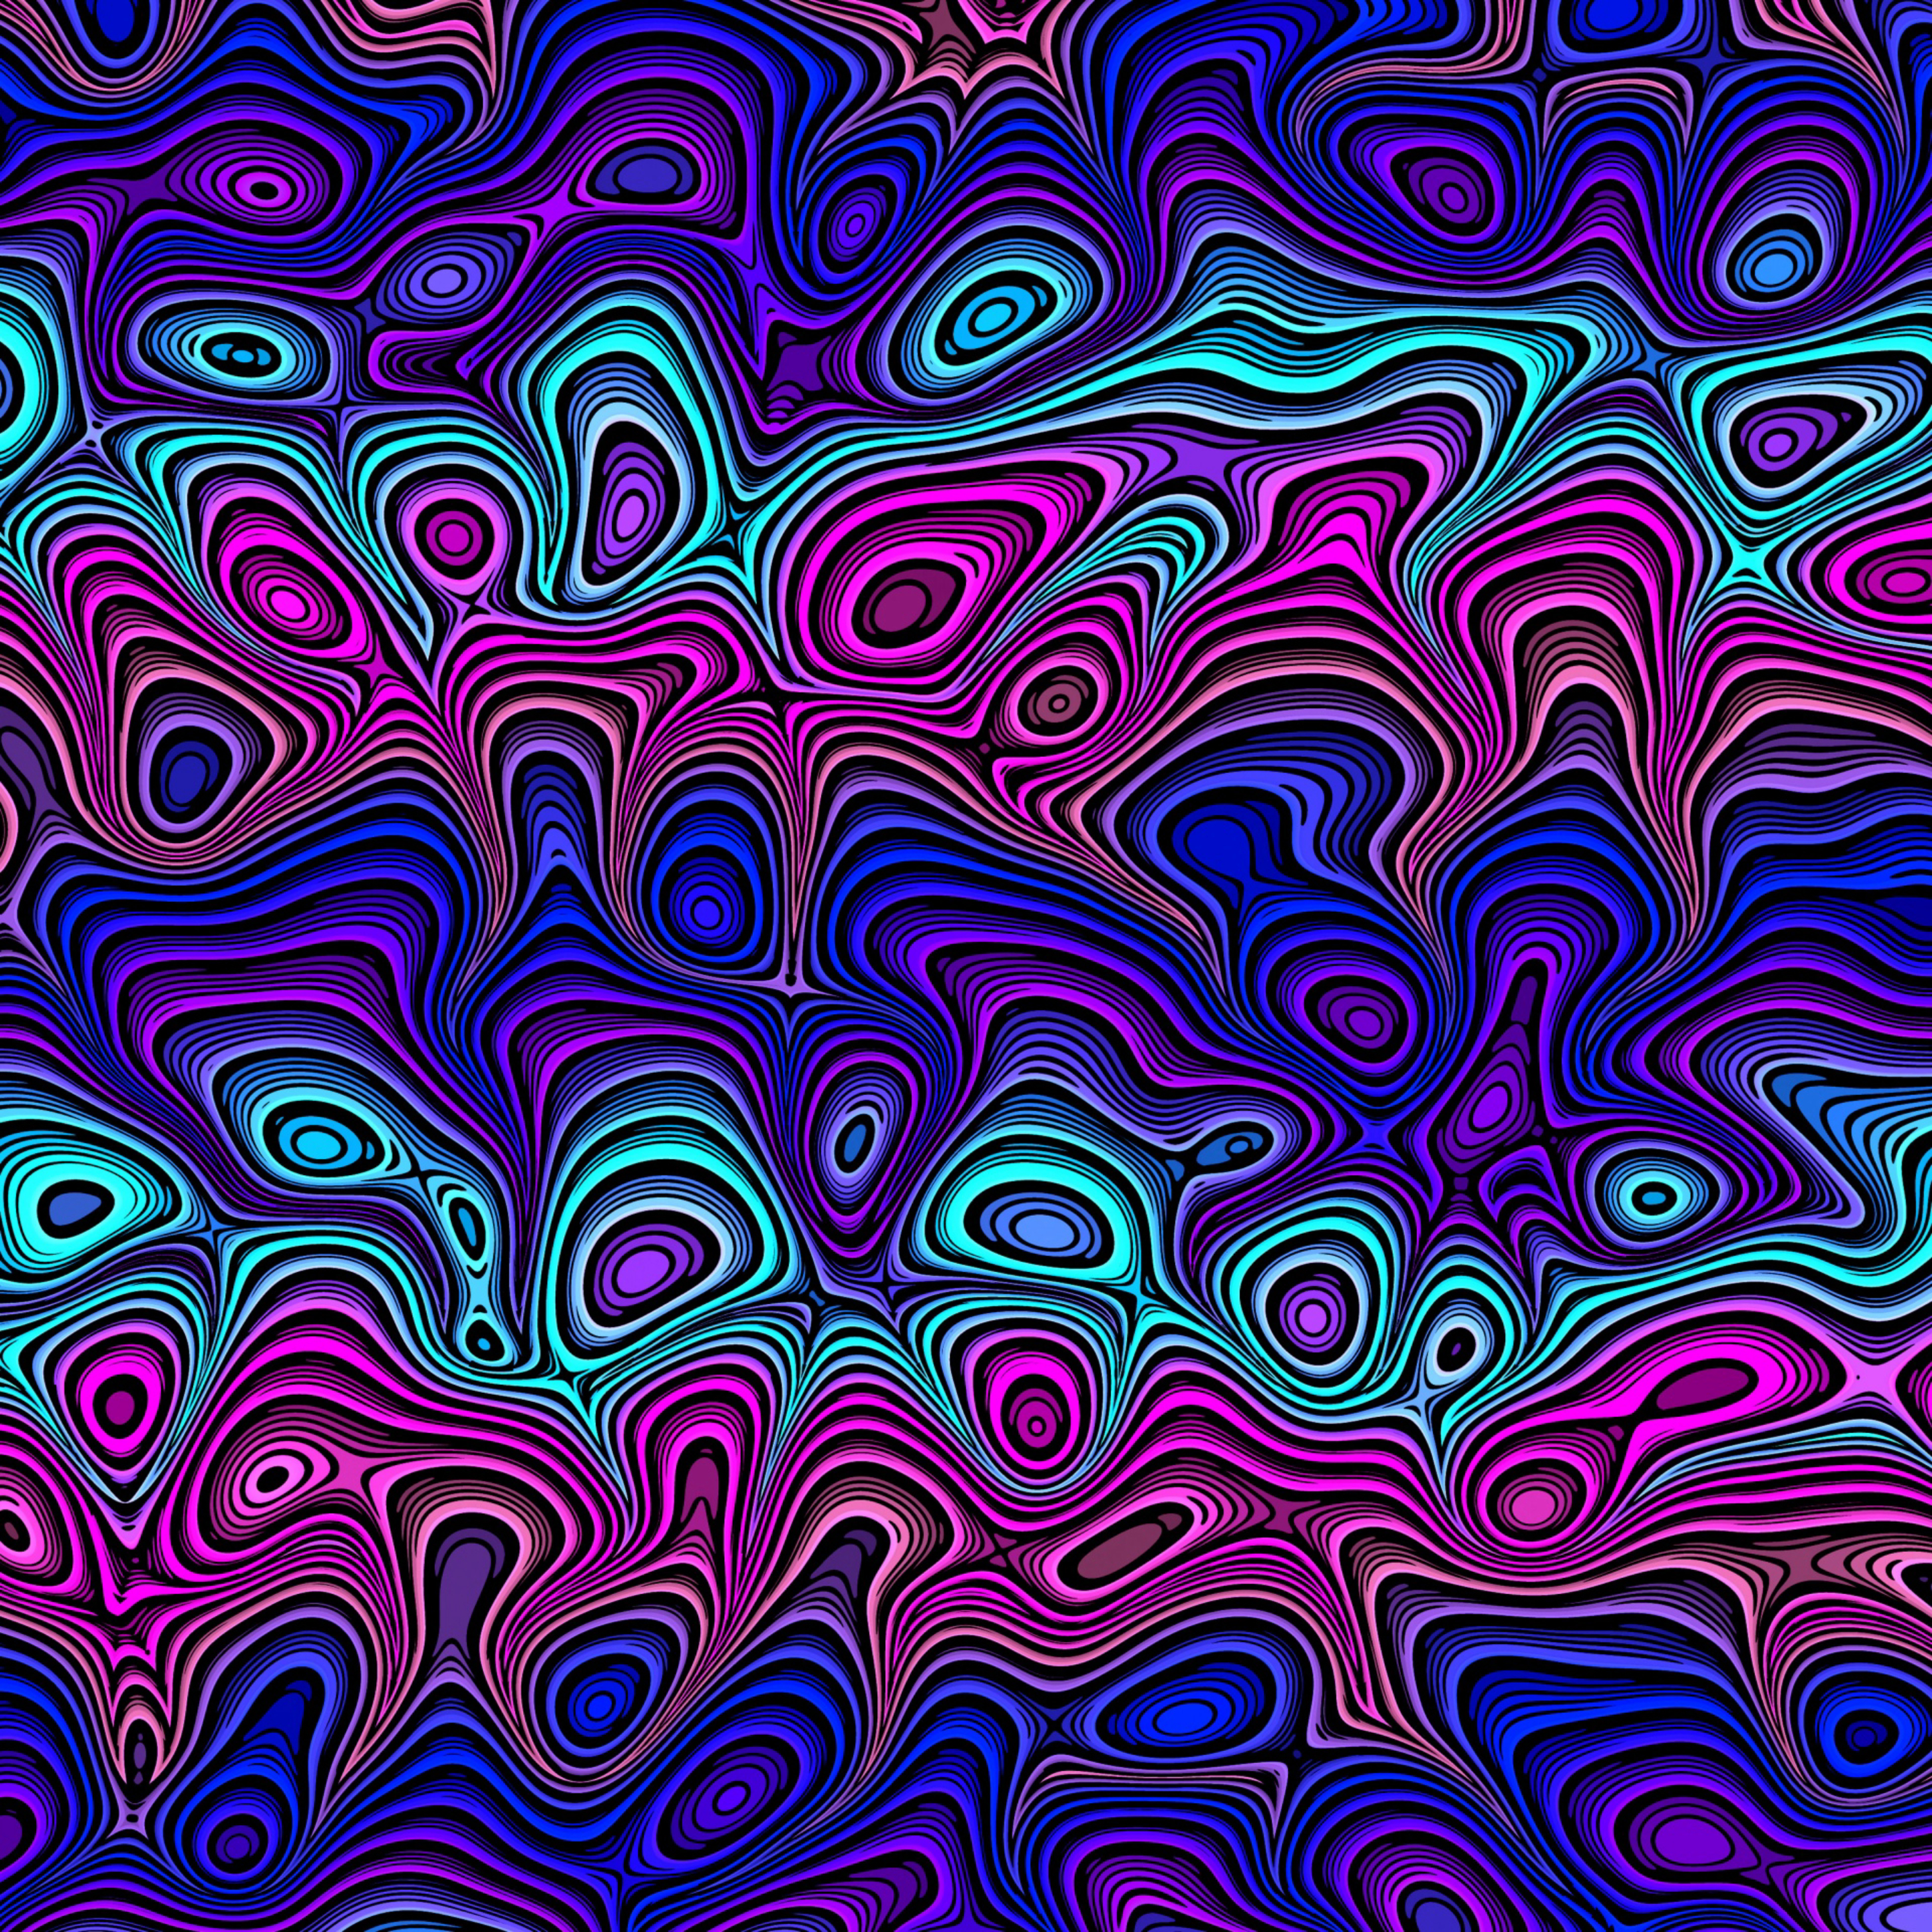 motley, multicolored, abstract, lines, wavy, swirling, involute